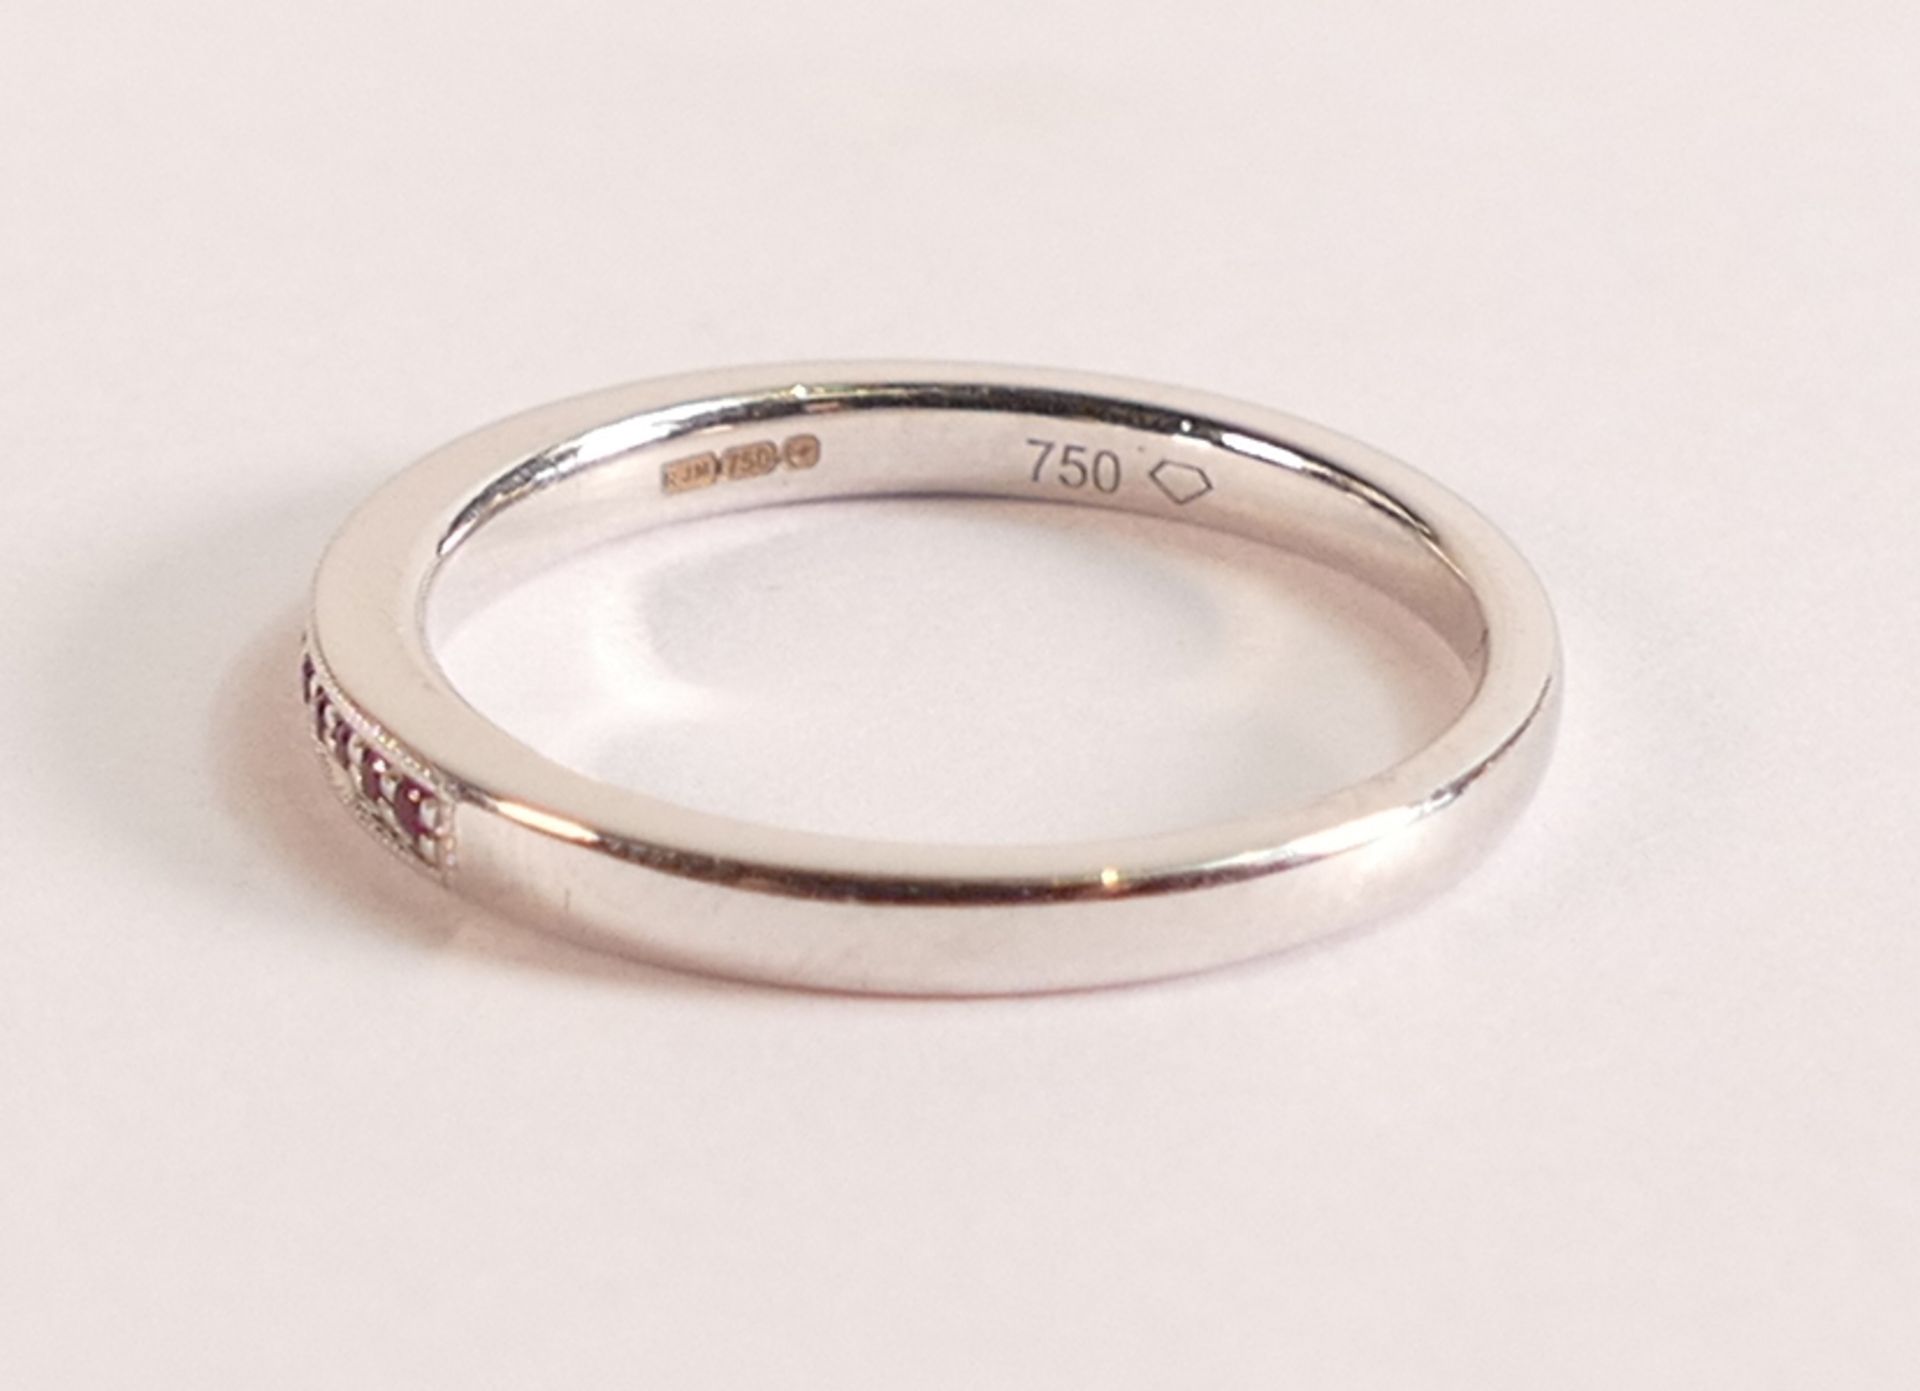 18ct White Gold and Ruby Ring - This sleek half eternity ring is made in 18ct White Gold and is - Image 2 of 3